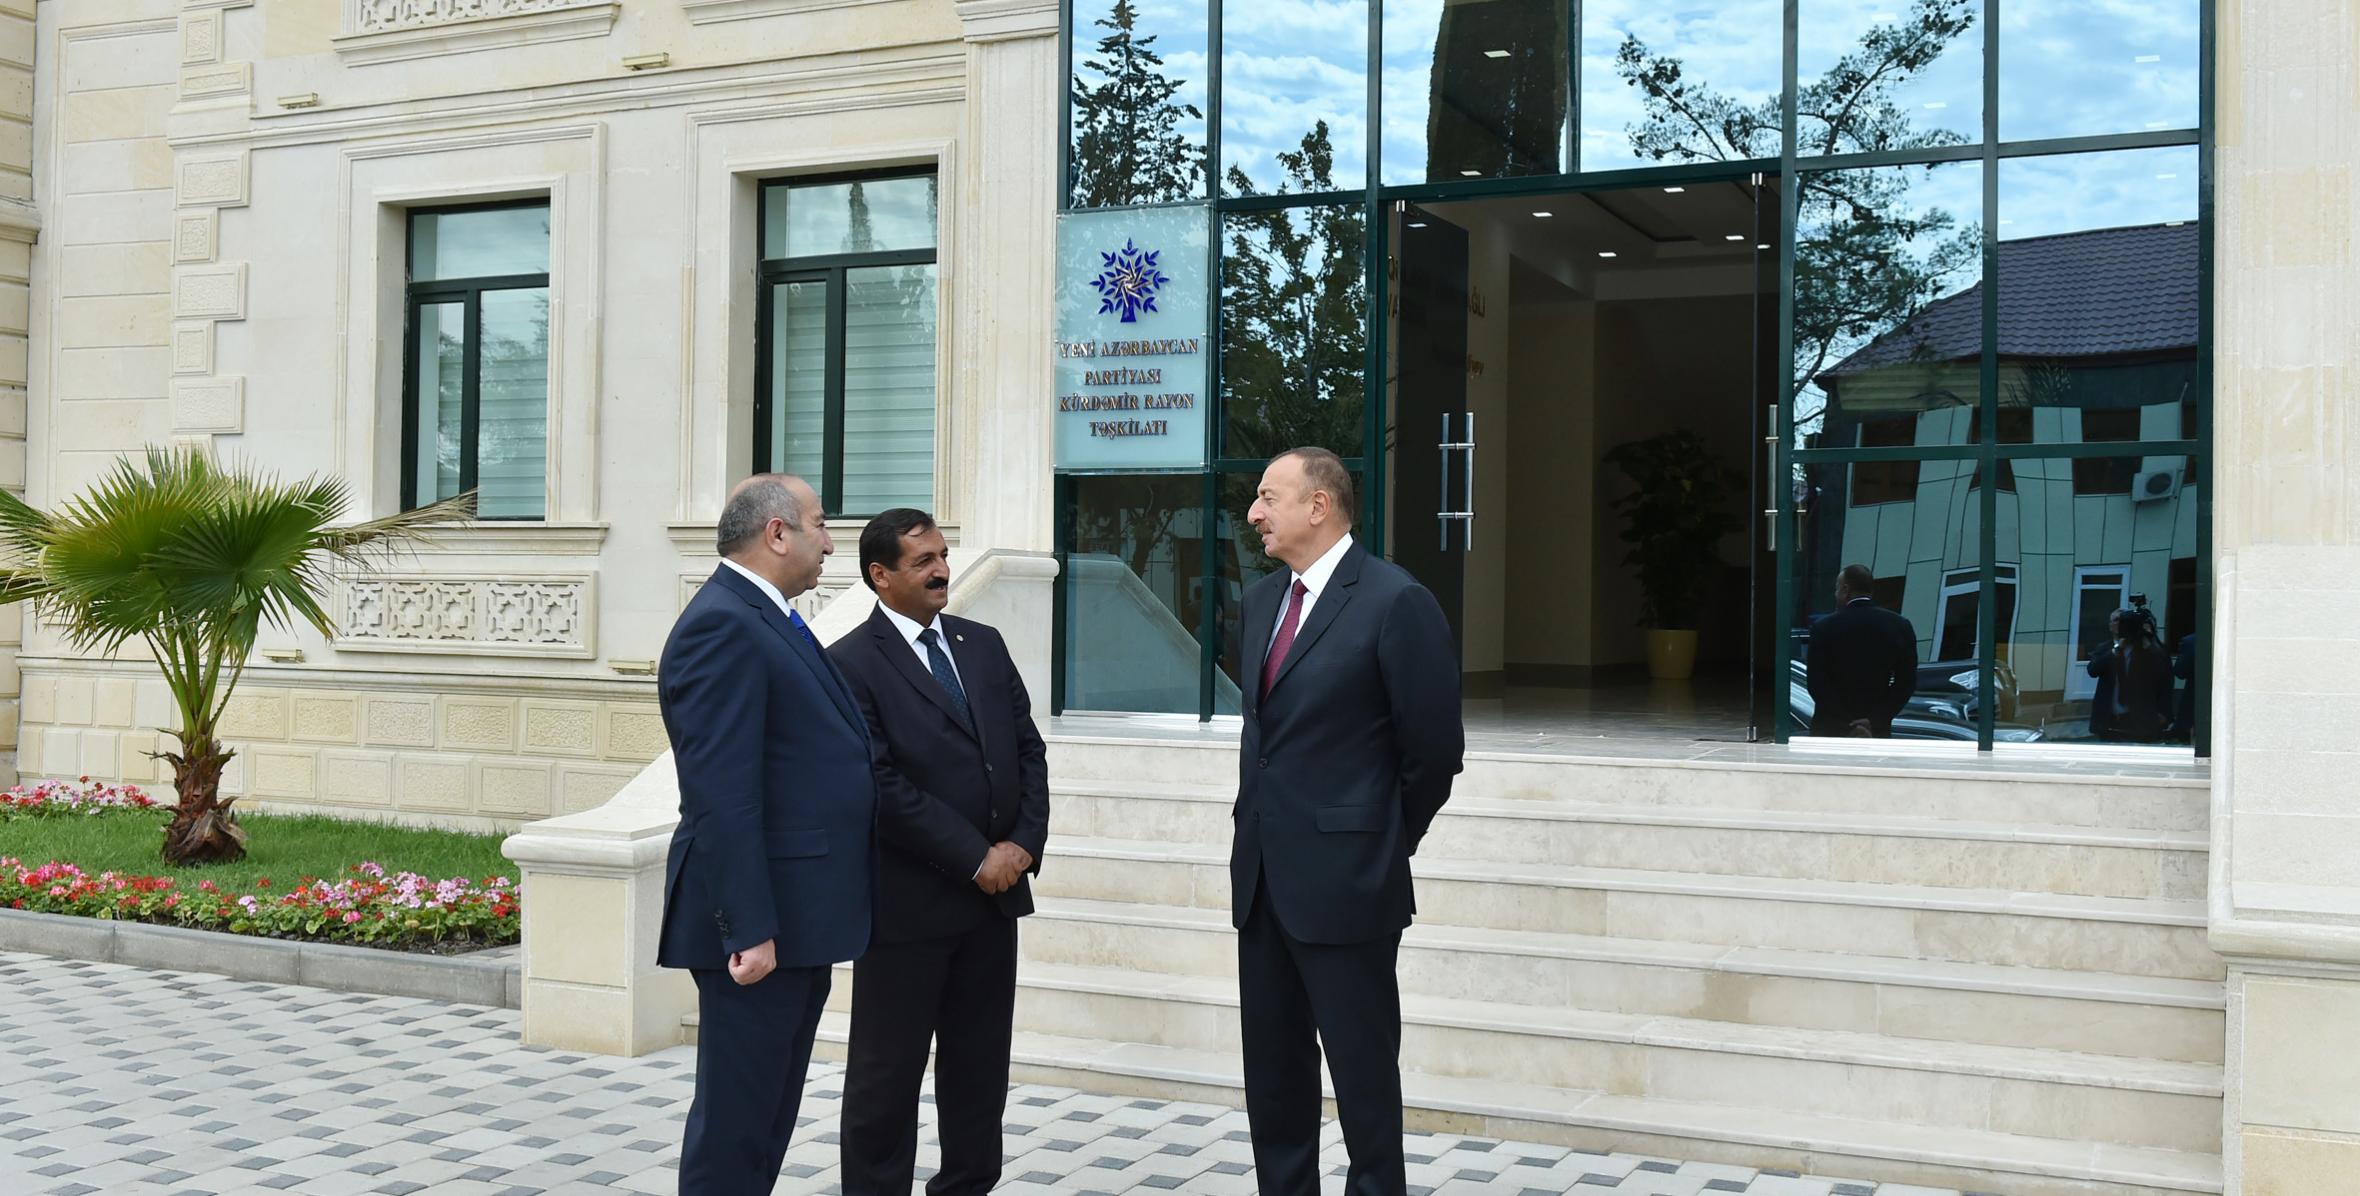 Ilham Aliyev attended the opening of the office building of Kurdamir District branch of New Azerbaijan Party